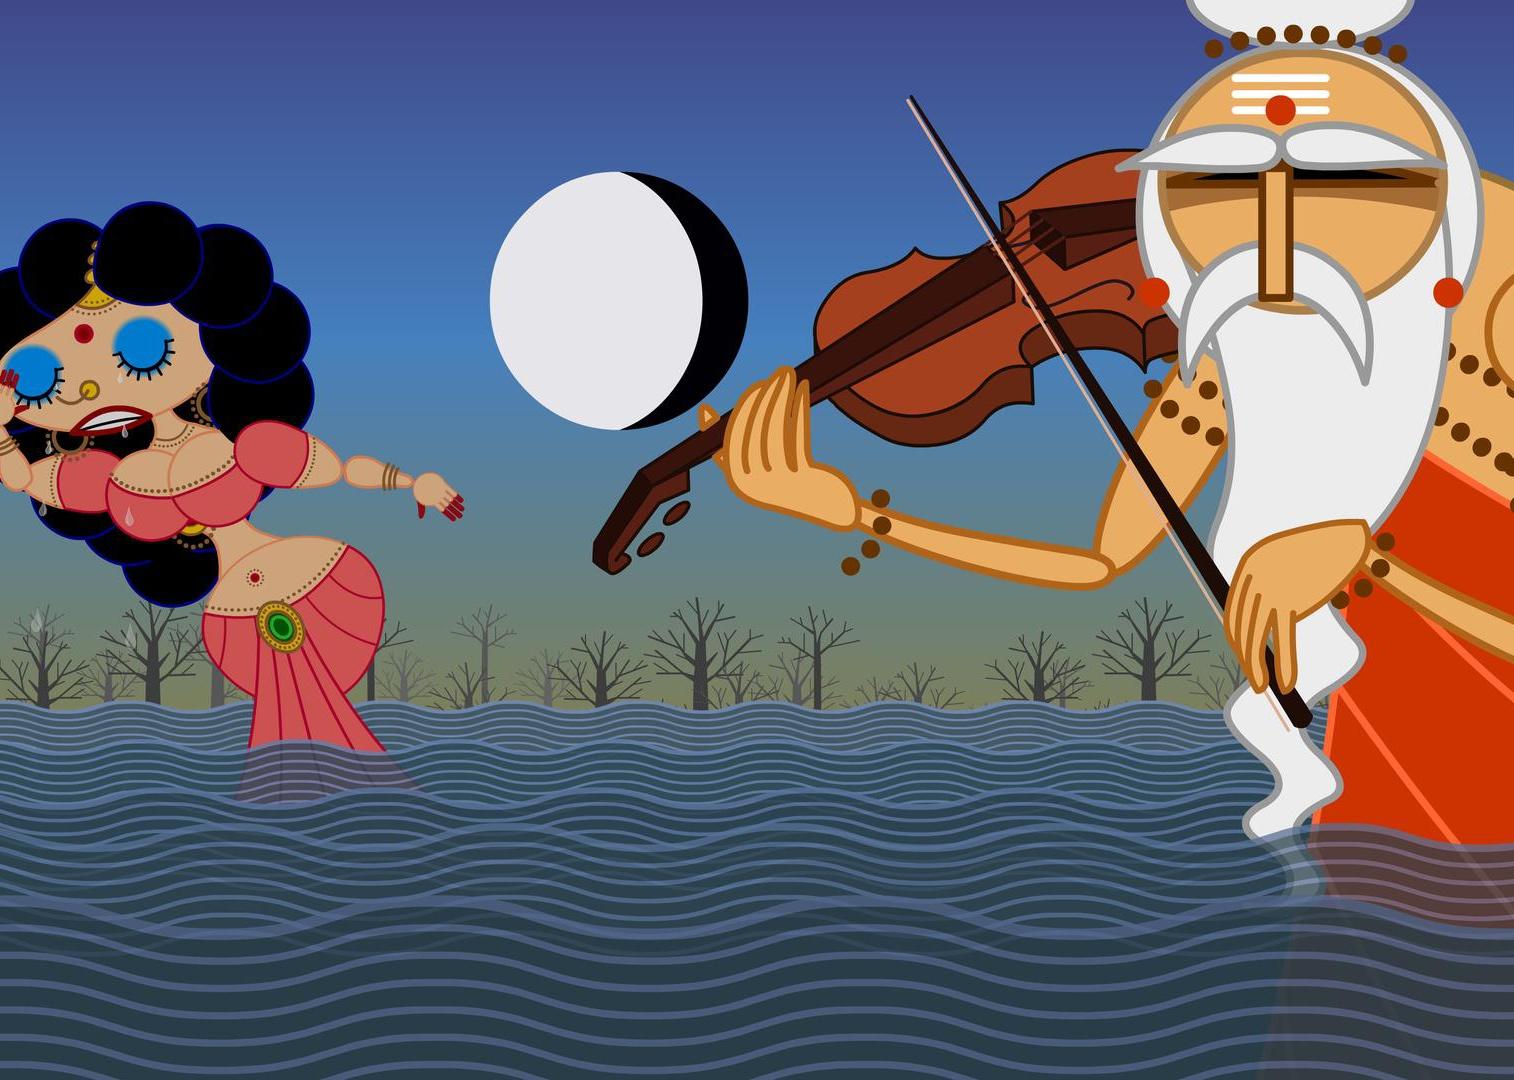 An illustration of an Indian woman in the water with a man playing a violin.